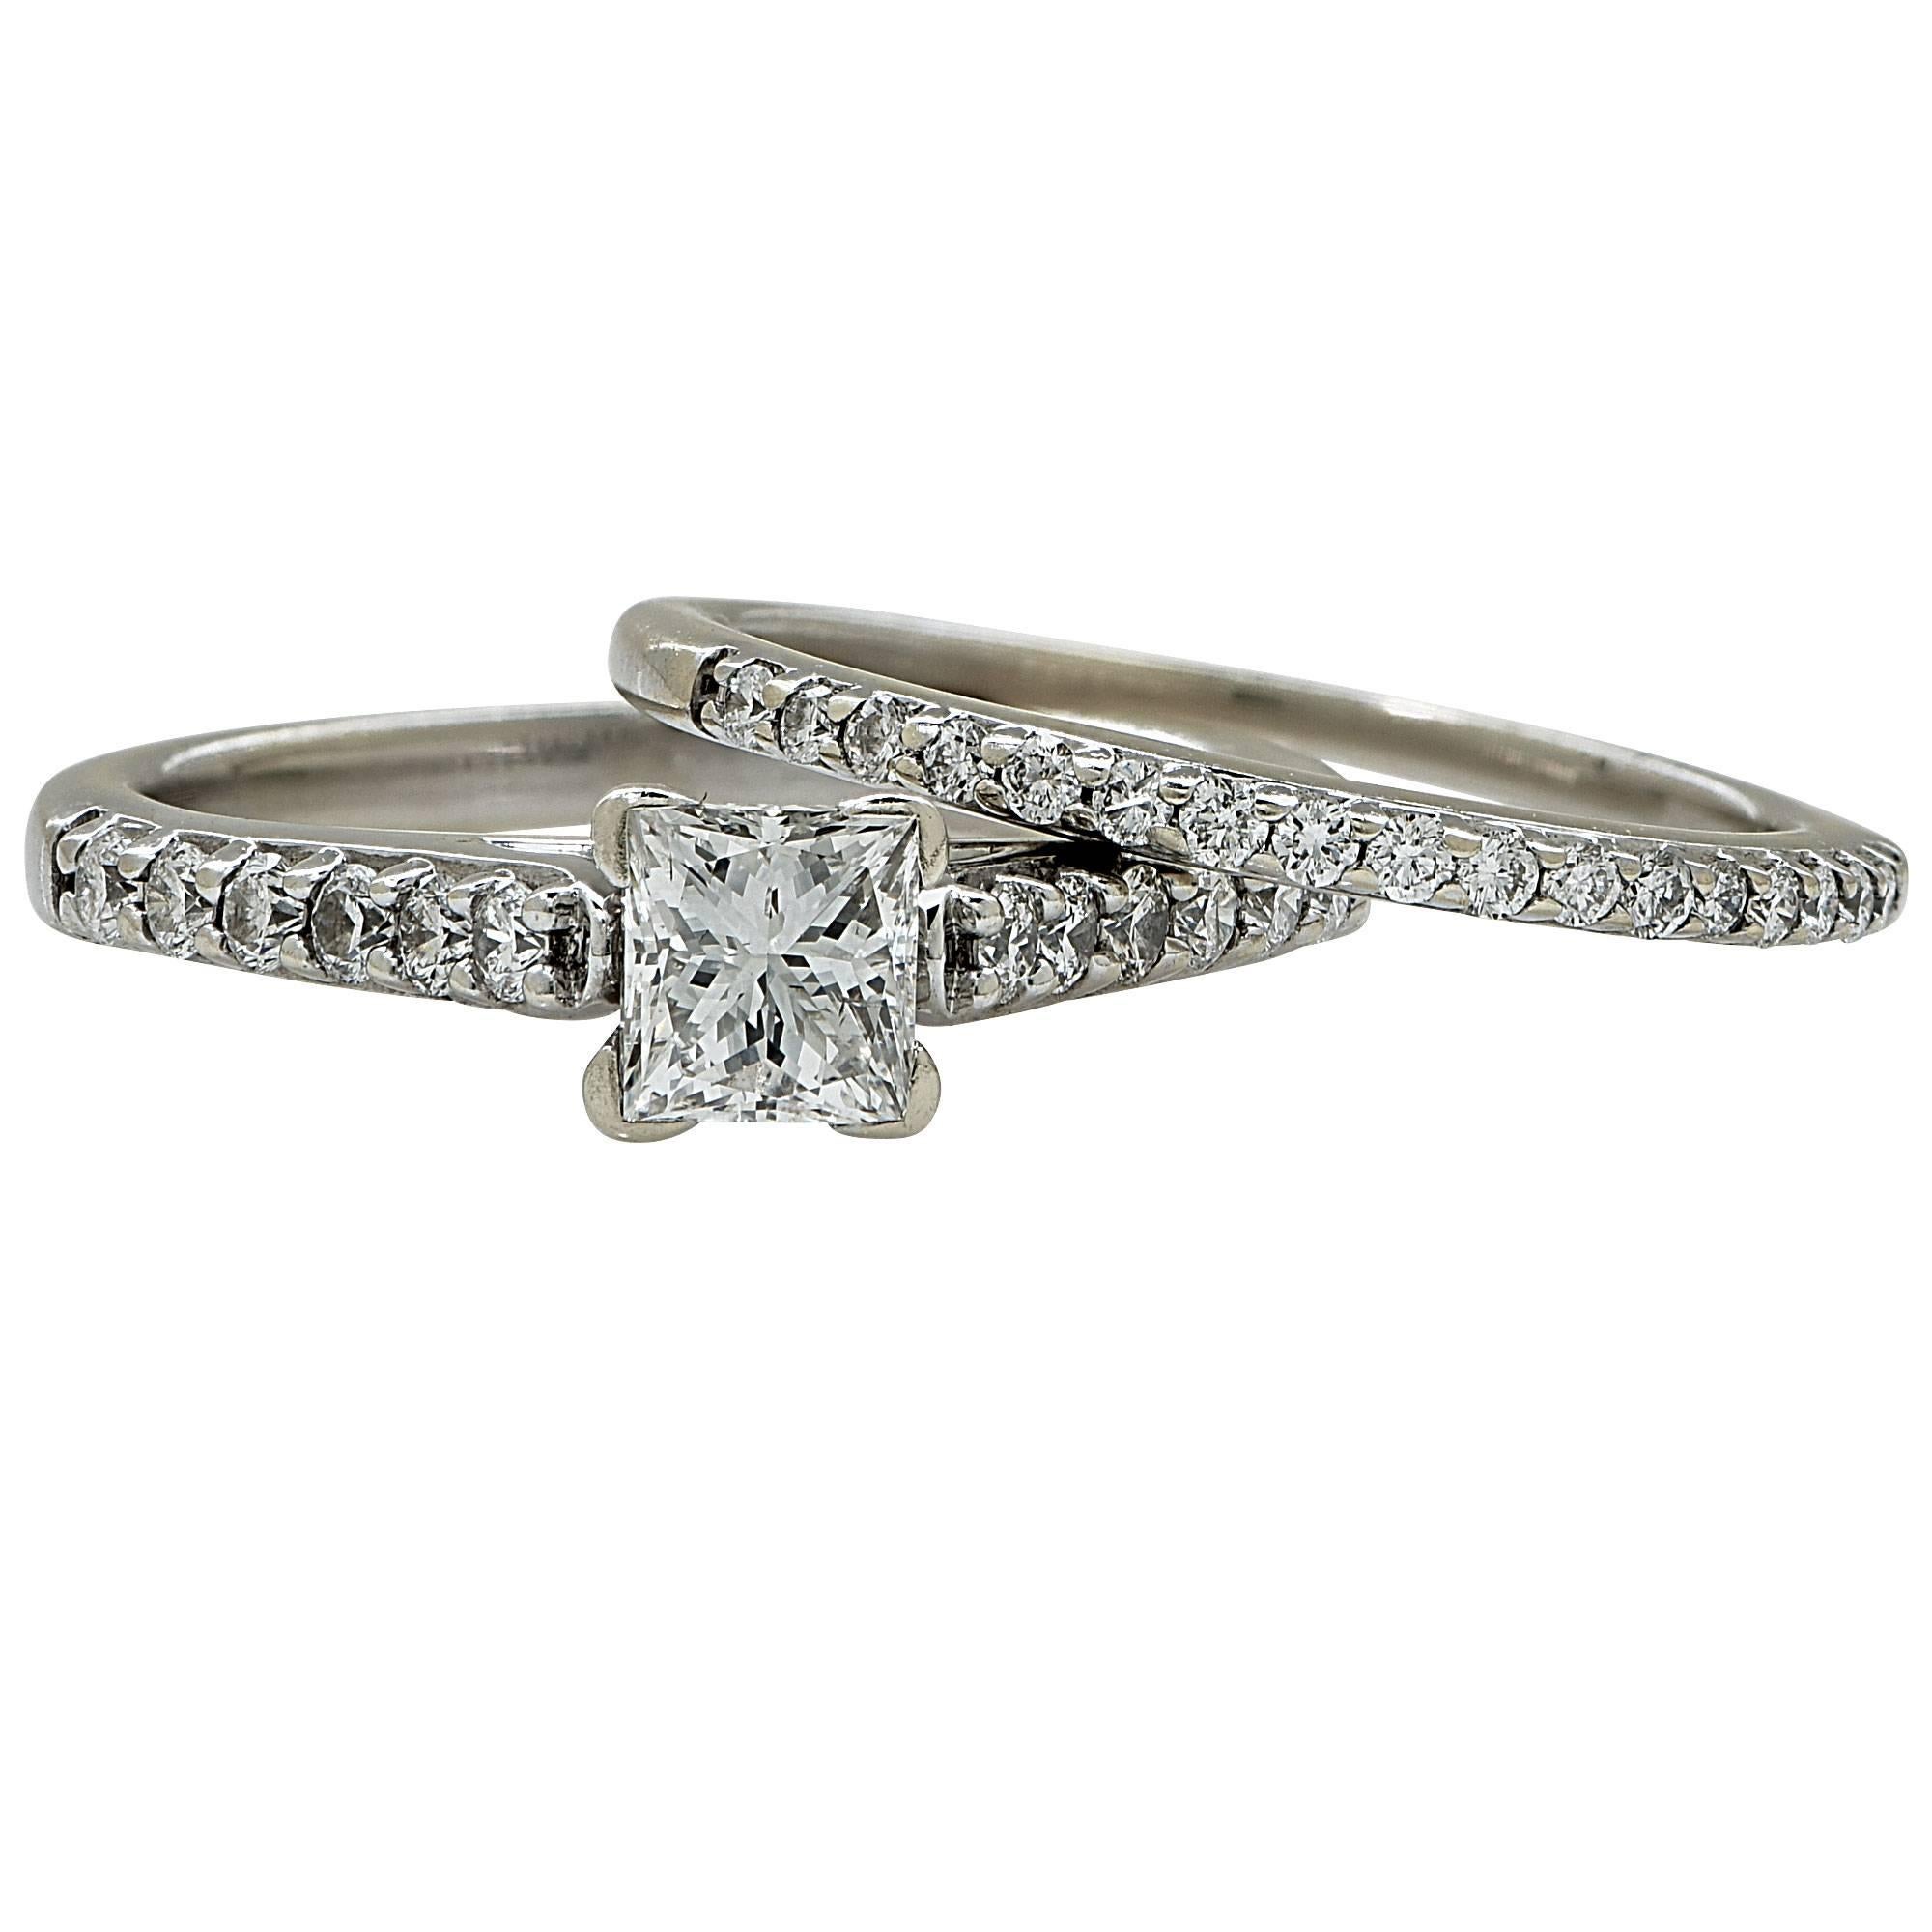 18k white gold wedding set featuring a .71ct F color I1 clarity princess cut diamond accented by .50cts of round brilliant cut diamonds E-F color SI2-I1 clarity.

The ring is a size 6.5 and can be sized up or down.
It is stamped and tested as 18k